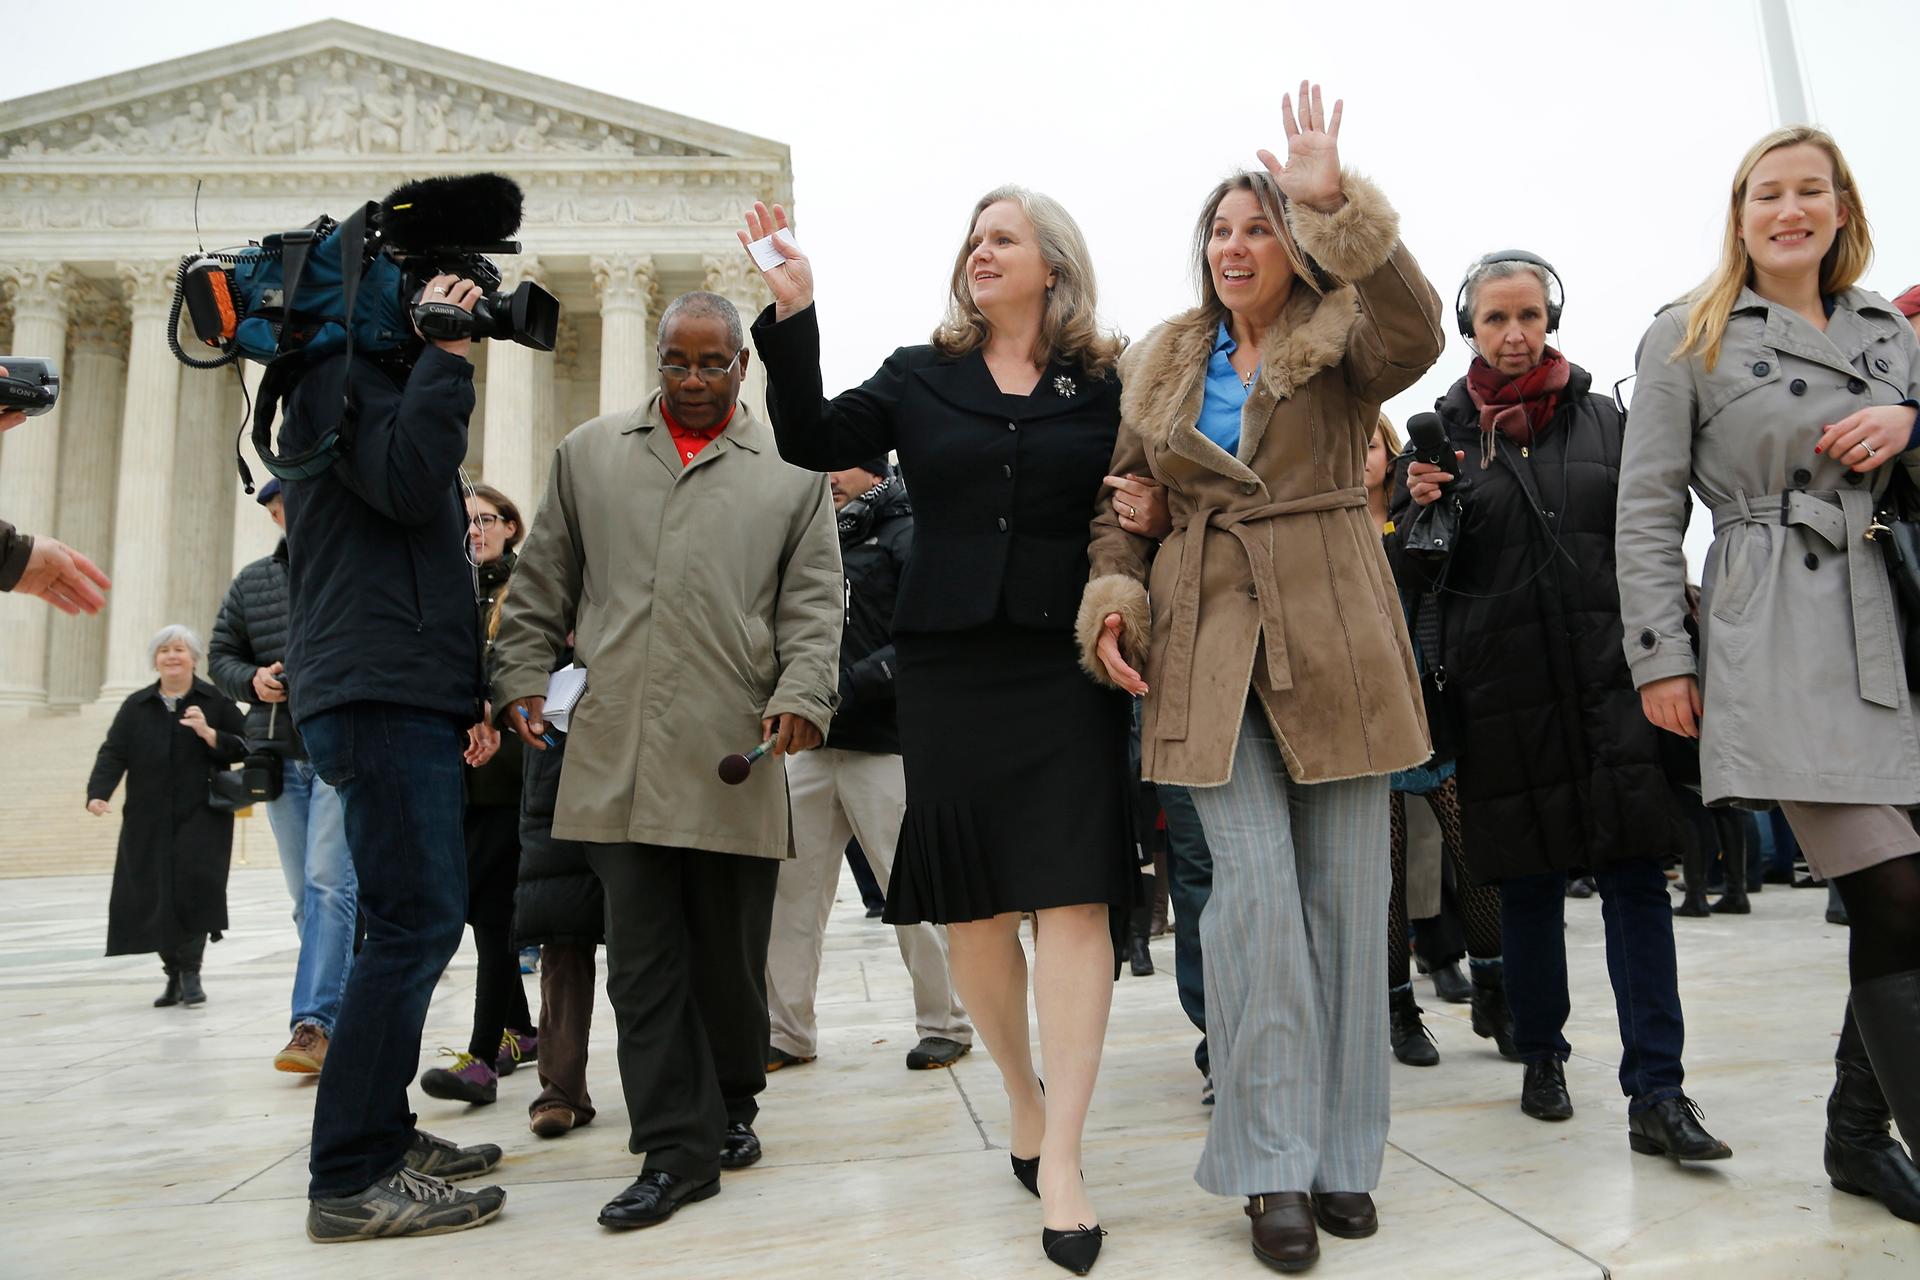 Peggy Young (3rd R) and her attorney Sharon Gustafson (4th R) wave to supporters as they depart the US Supreme Court building on December 3, 2014. 